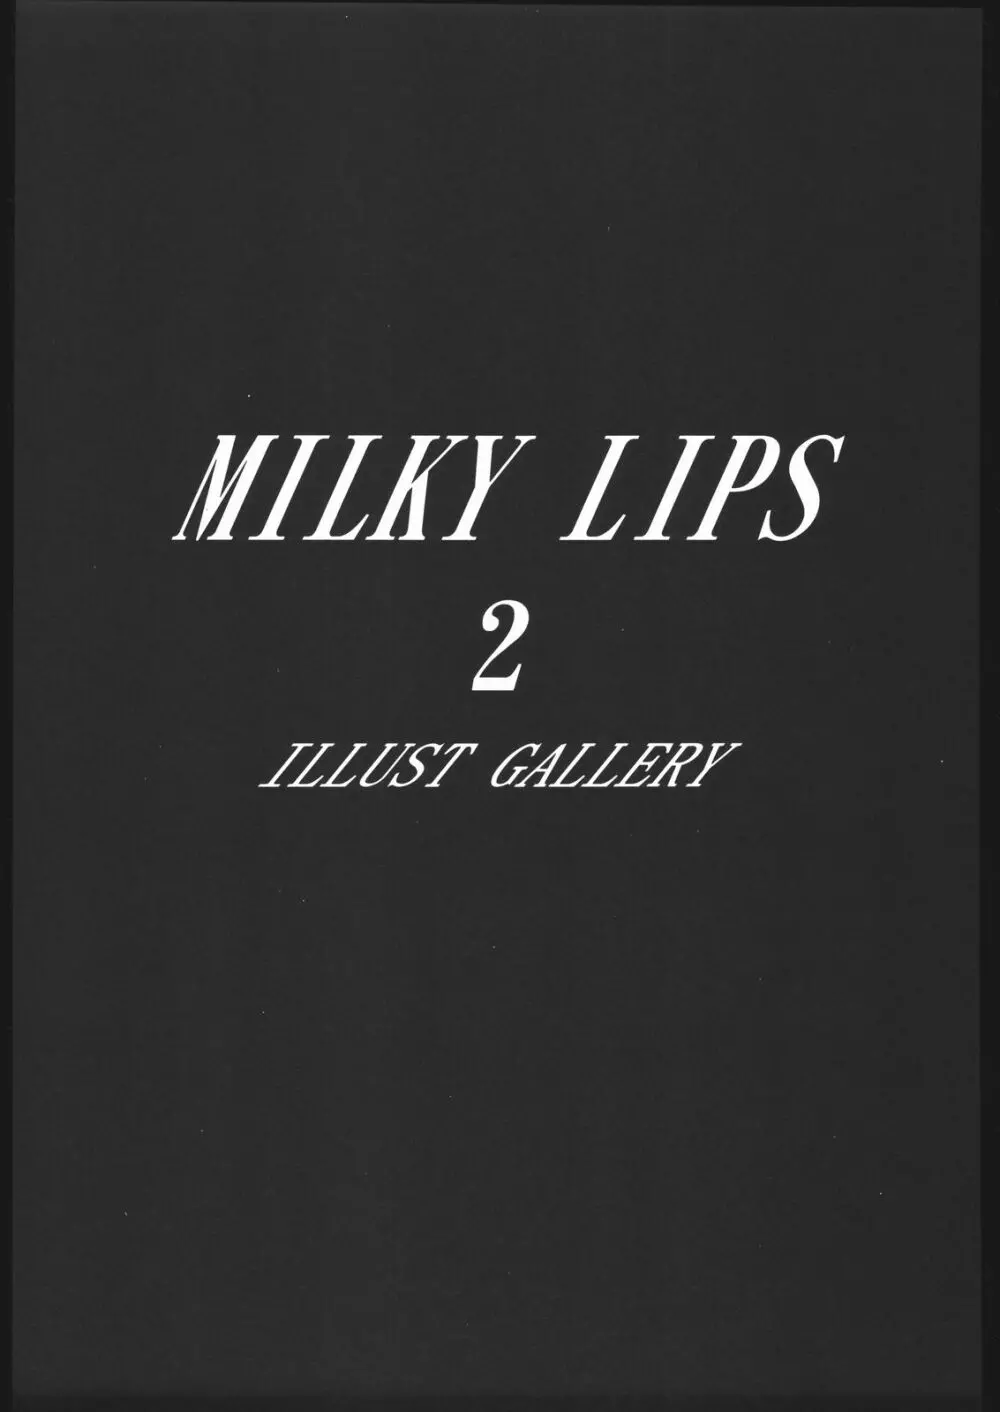 MILKY LIPS 2 Page.46